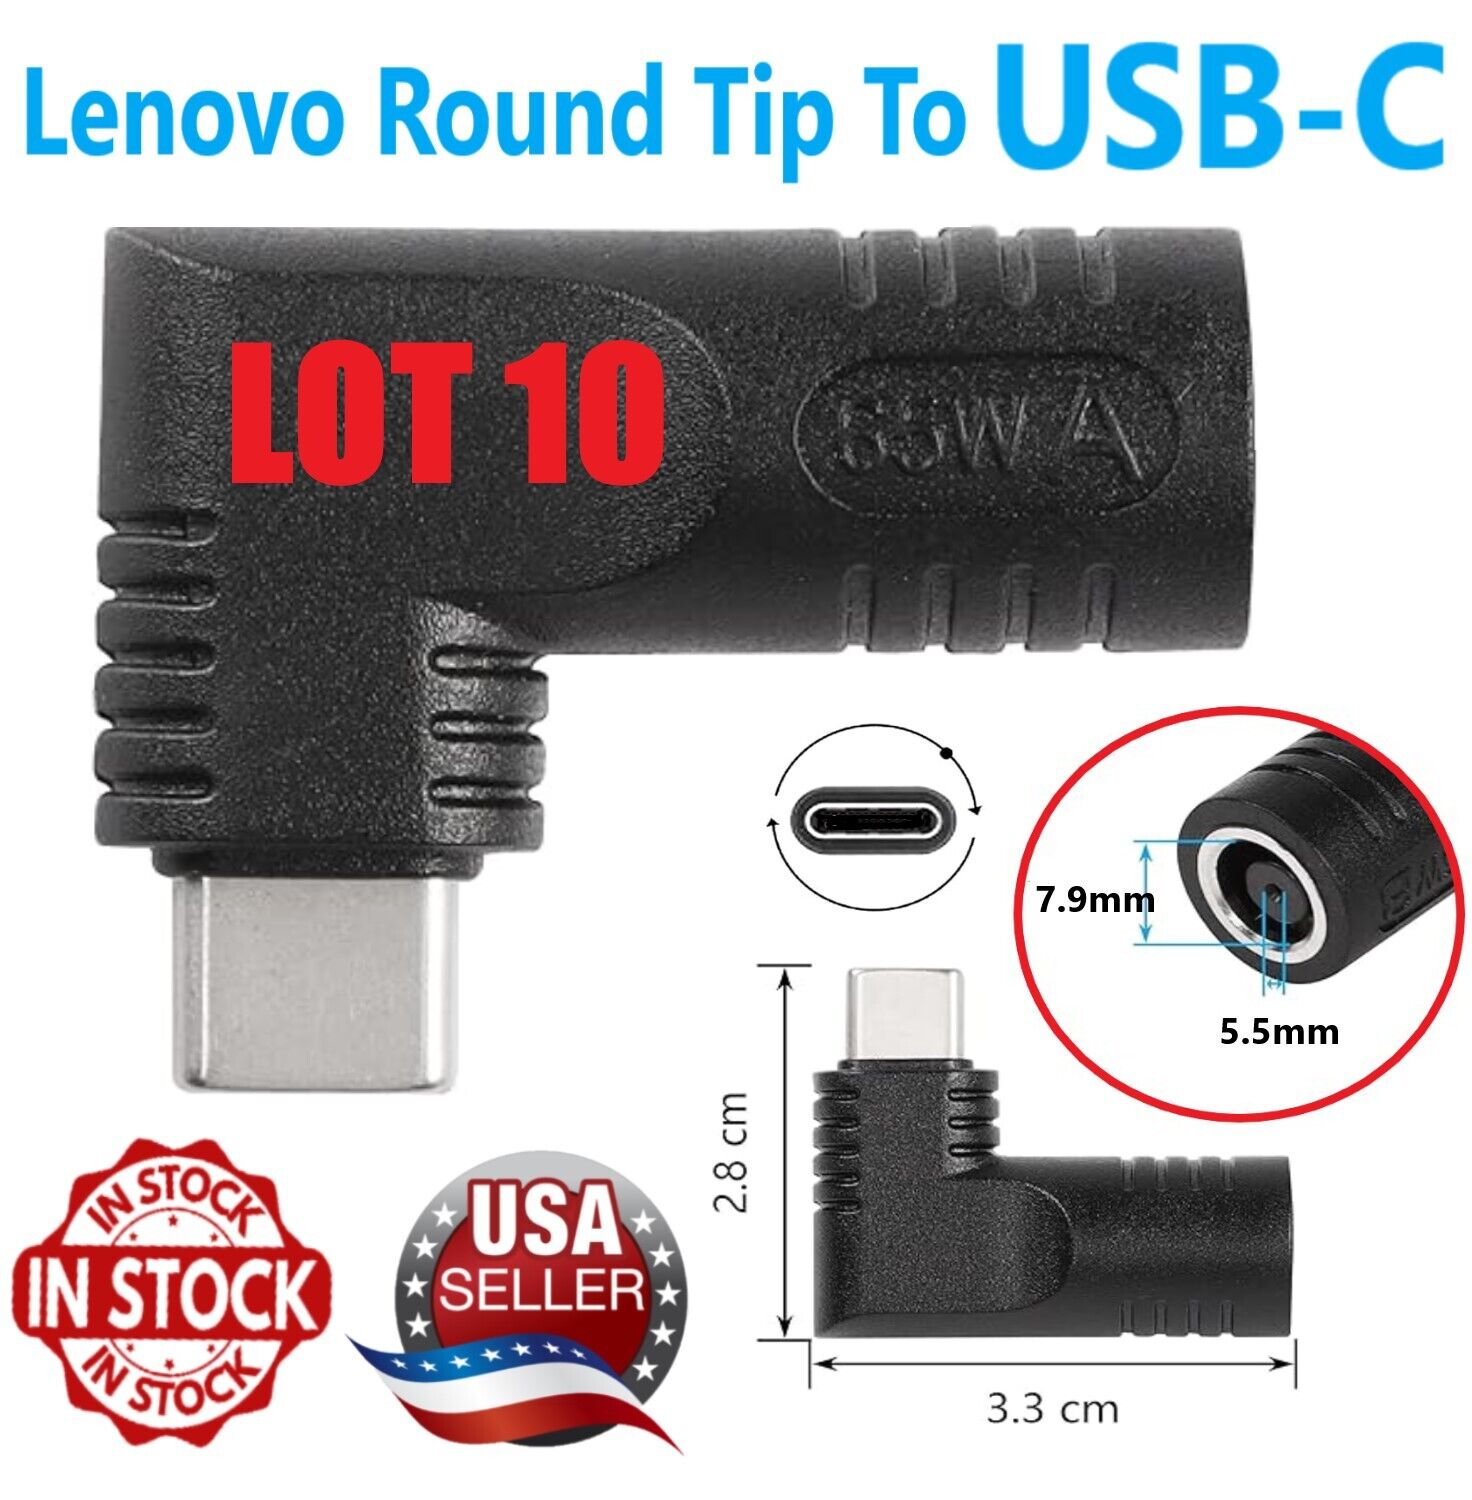 LOT 10 Lenovo 7.9 mm Round Tip to DC USB C Type C Adapter Converter For Laptops